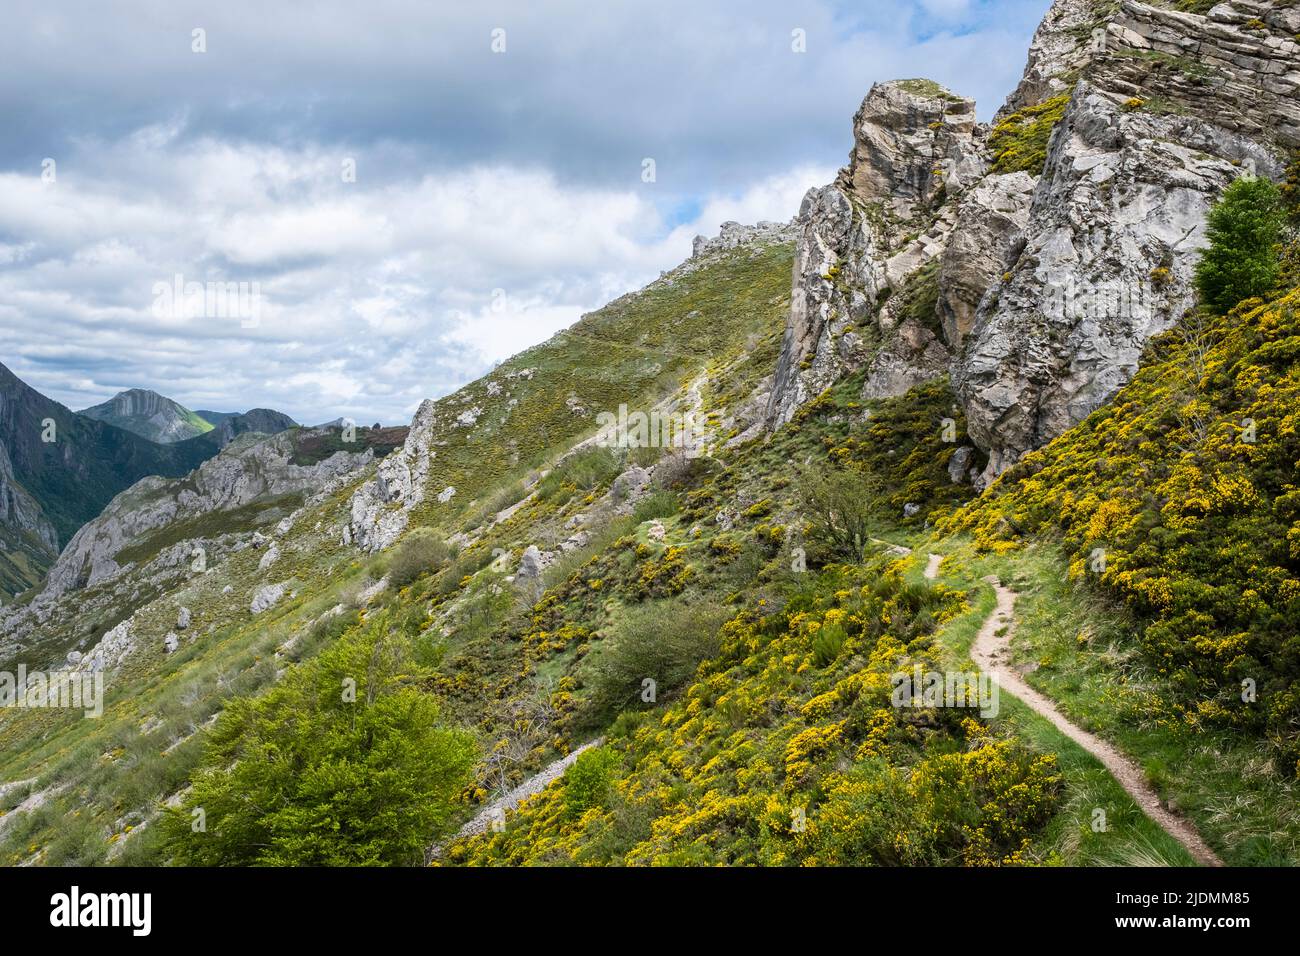 Spain, Asturias. Gorse along Hikers' Trail, Natural Park of Somiedo, Biosphere Reserve, Cantabrian Mountains. Stock Photo